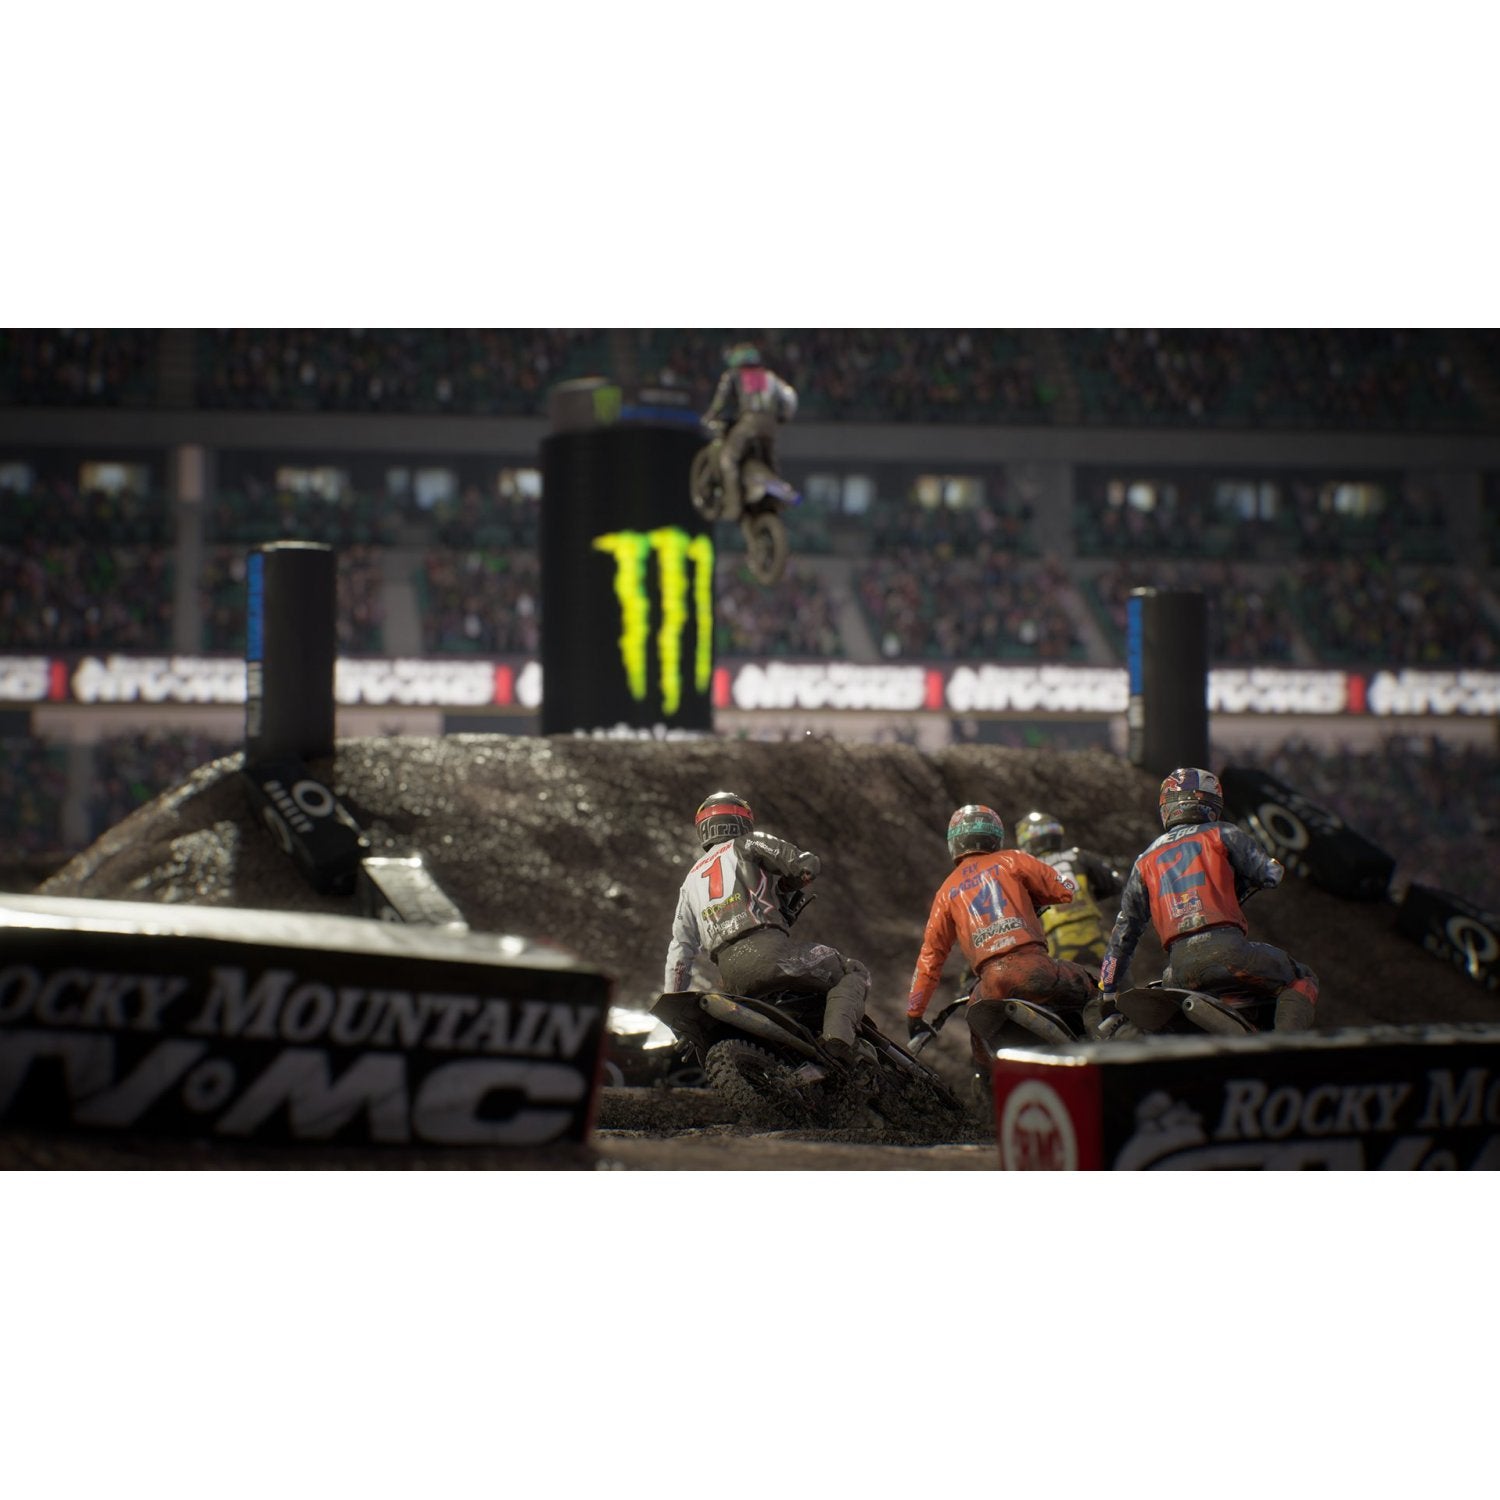 NSW Monster Energy Supercross - The Official Videogame 3